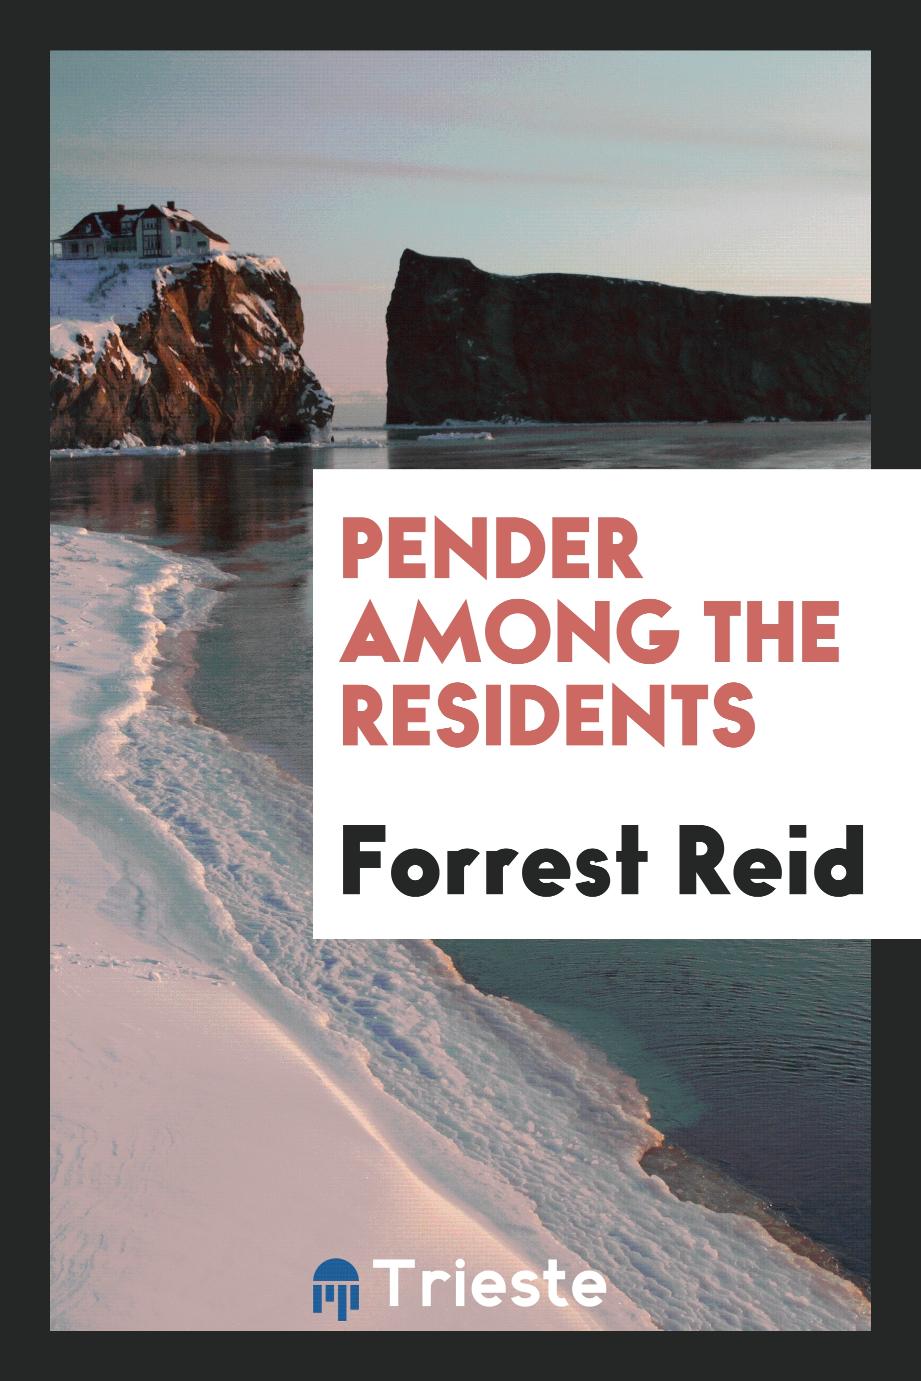 Pender among the residents